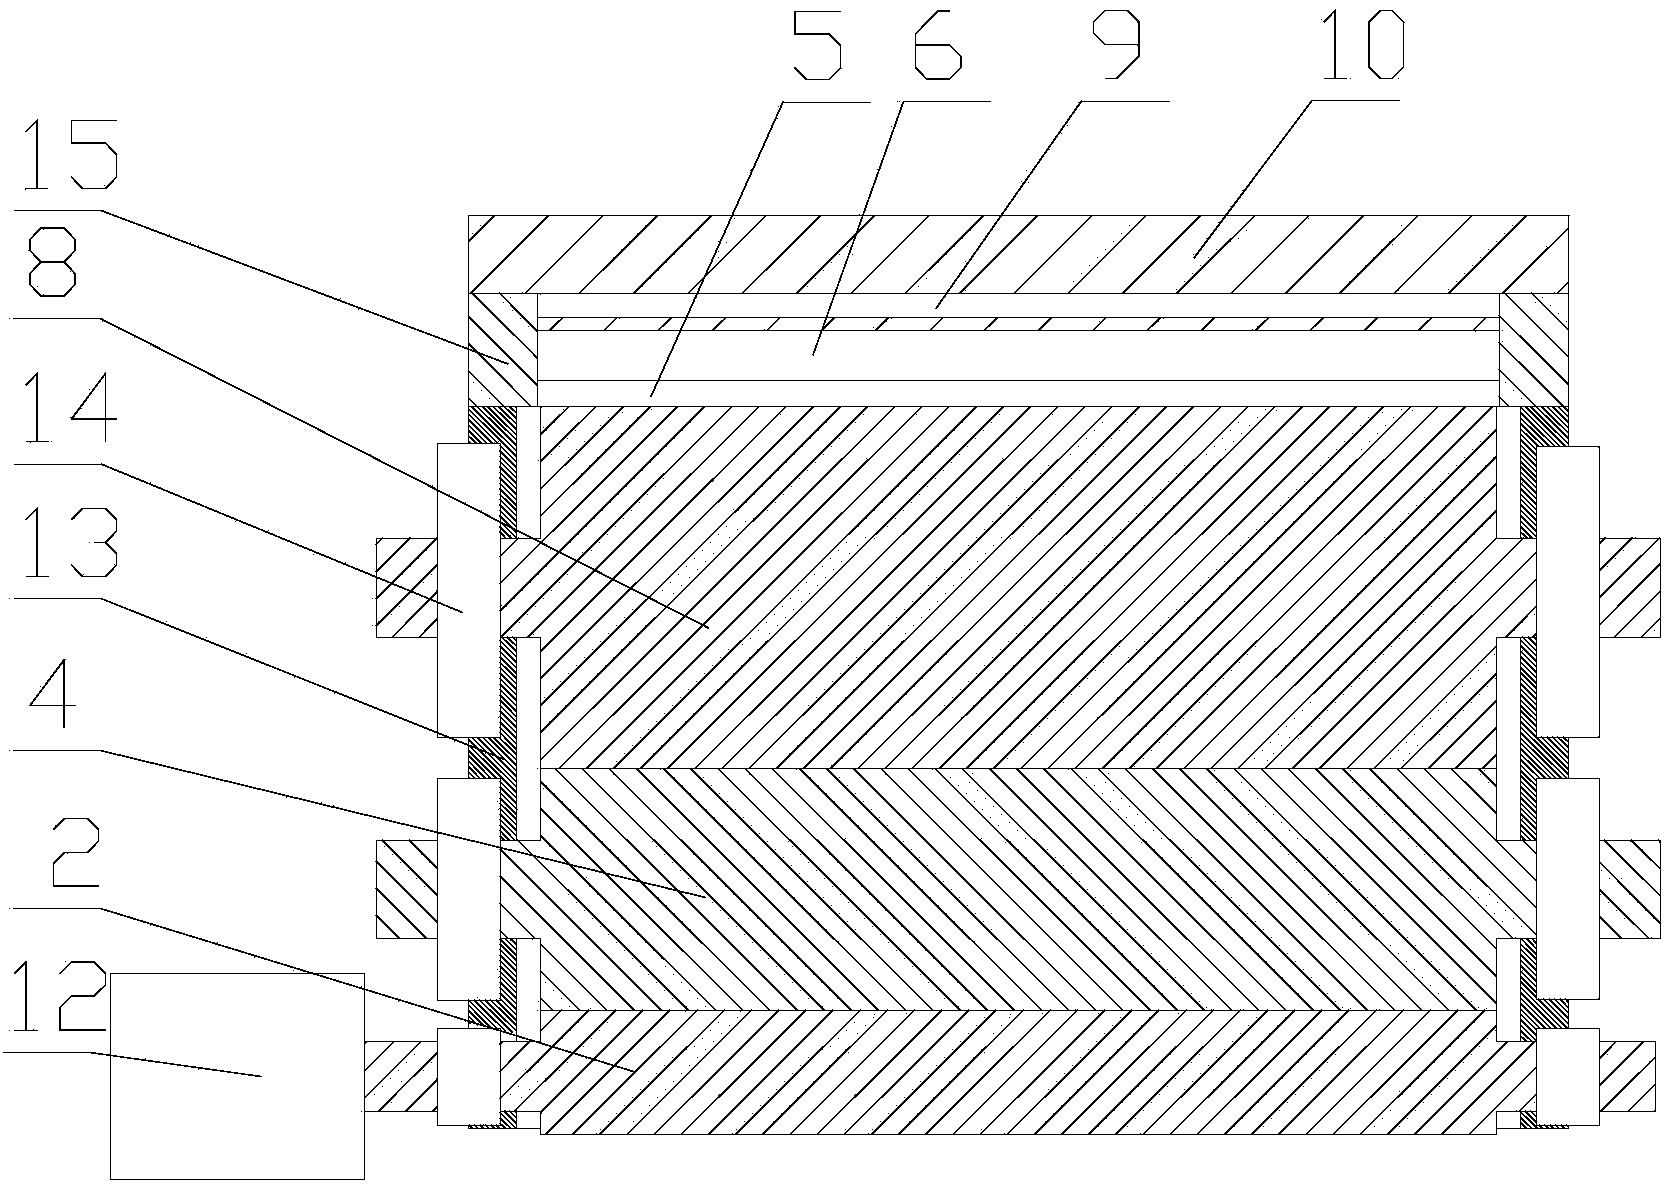 Rolling mechanism used in magnetic levitation superconductivity rolling mill